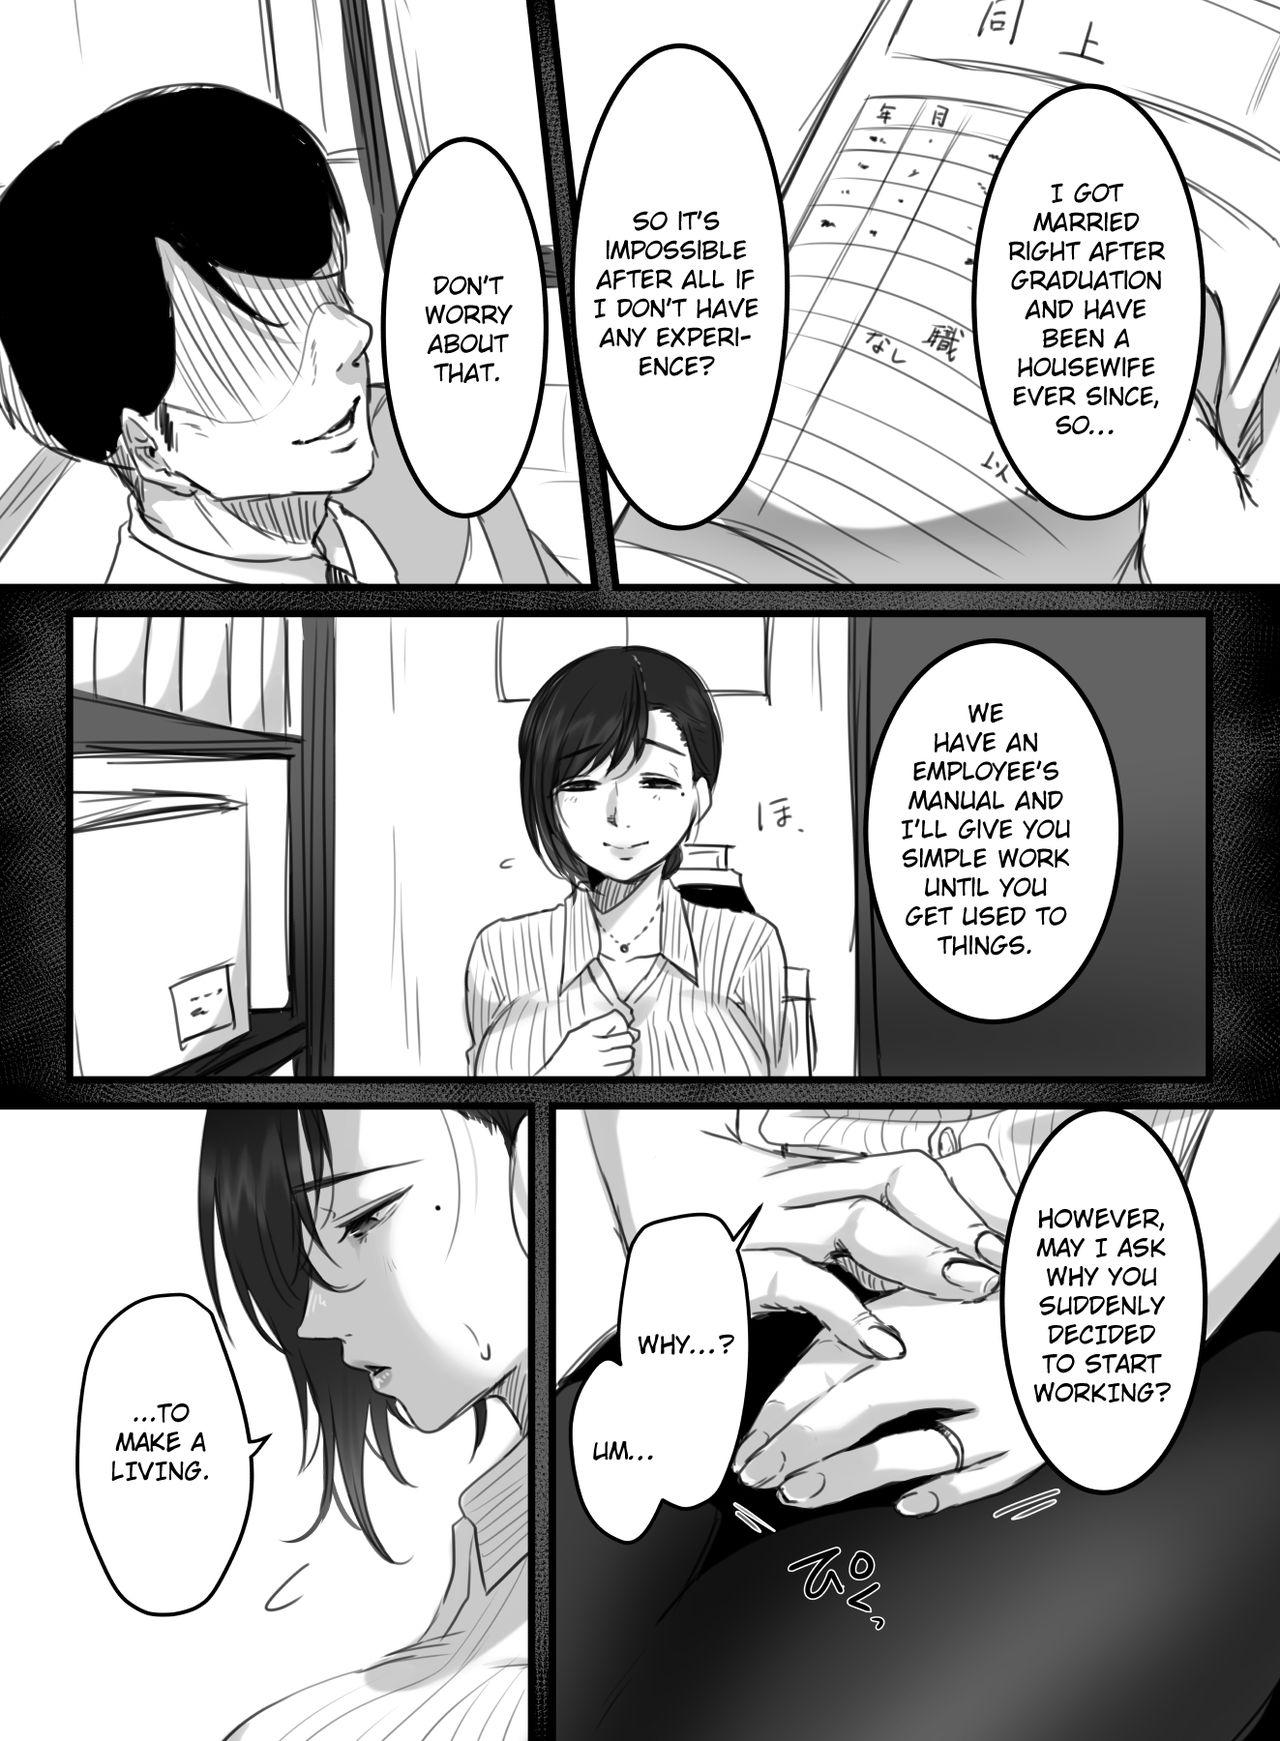 Amatures Gone Wild Re: 15-fun no Zangyou | Re: 15 Minutes of Overtime - Original Guyonshemale - Page 7